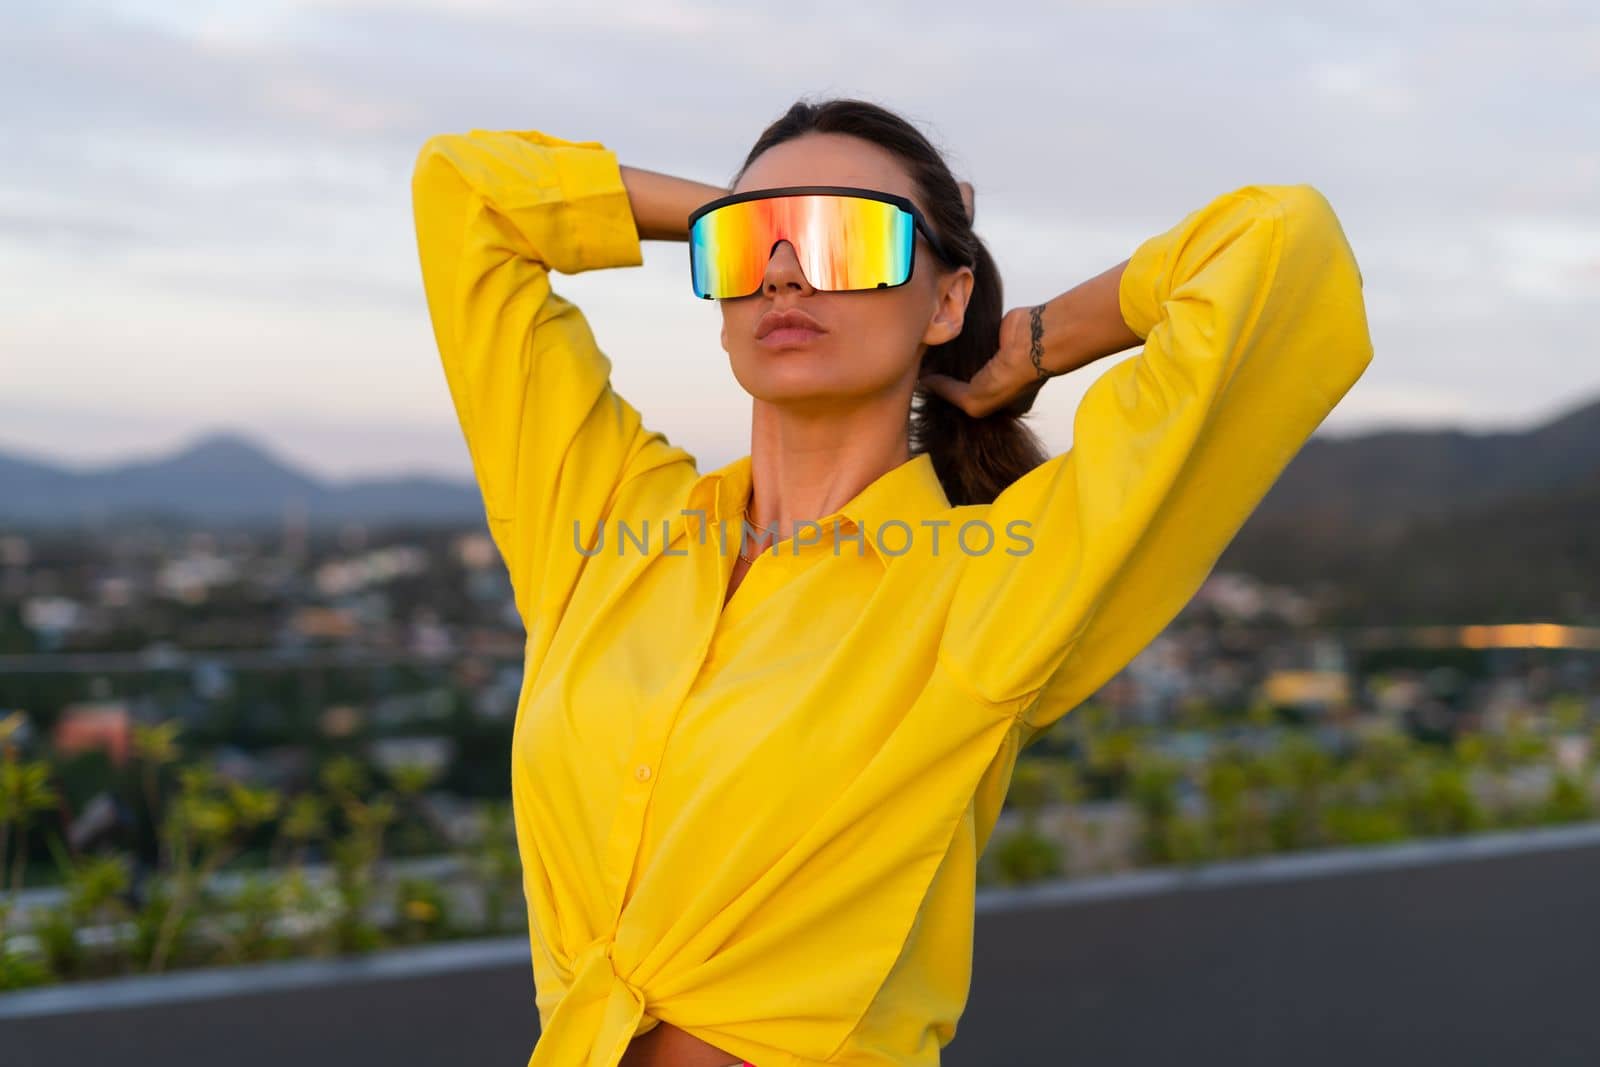 Stylish fit fashion women in bright yellow shirt trendy shield visor rainbow sunglasses posing at rooftop terrace tropical view outdoor sunset warm light